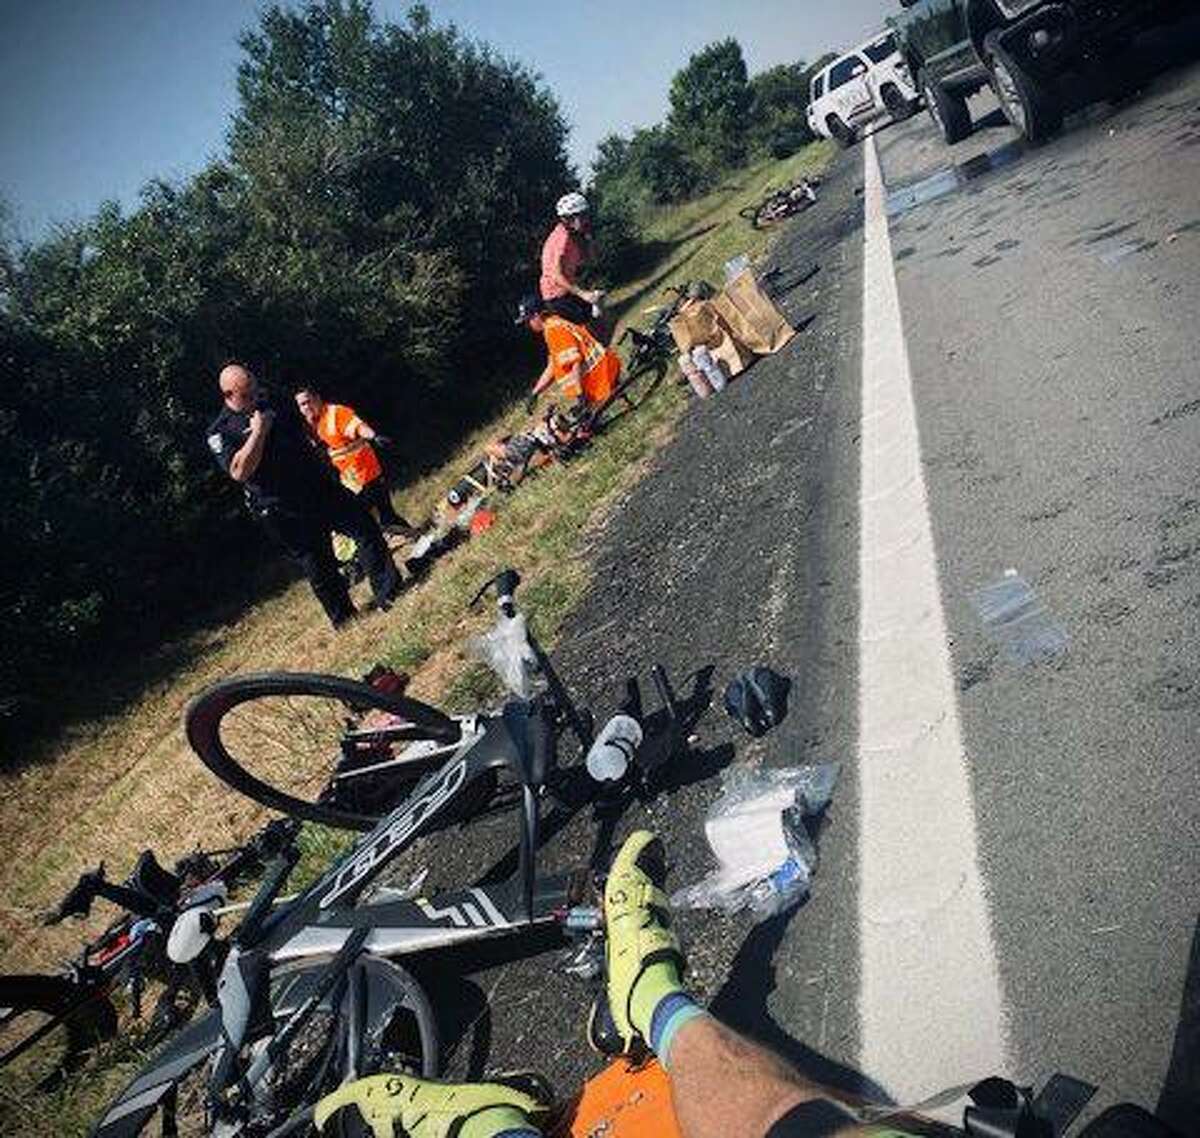 Six bicyclists were injured Sept. 25, 2021, in Waller, Texas, when witnesses say a pickup driver, 16, was intentionally blowing exhaust on them.